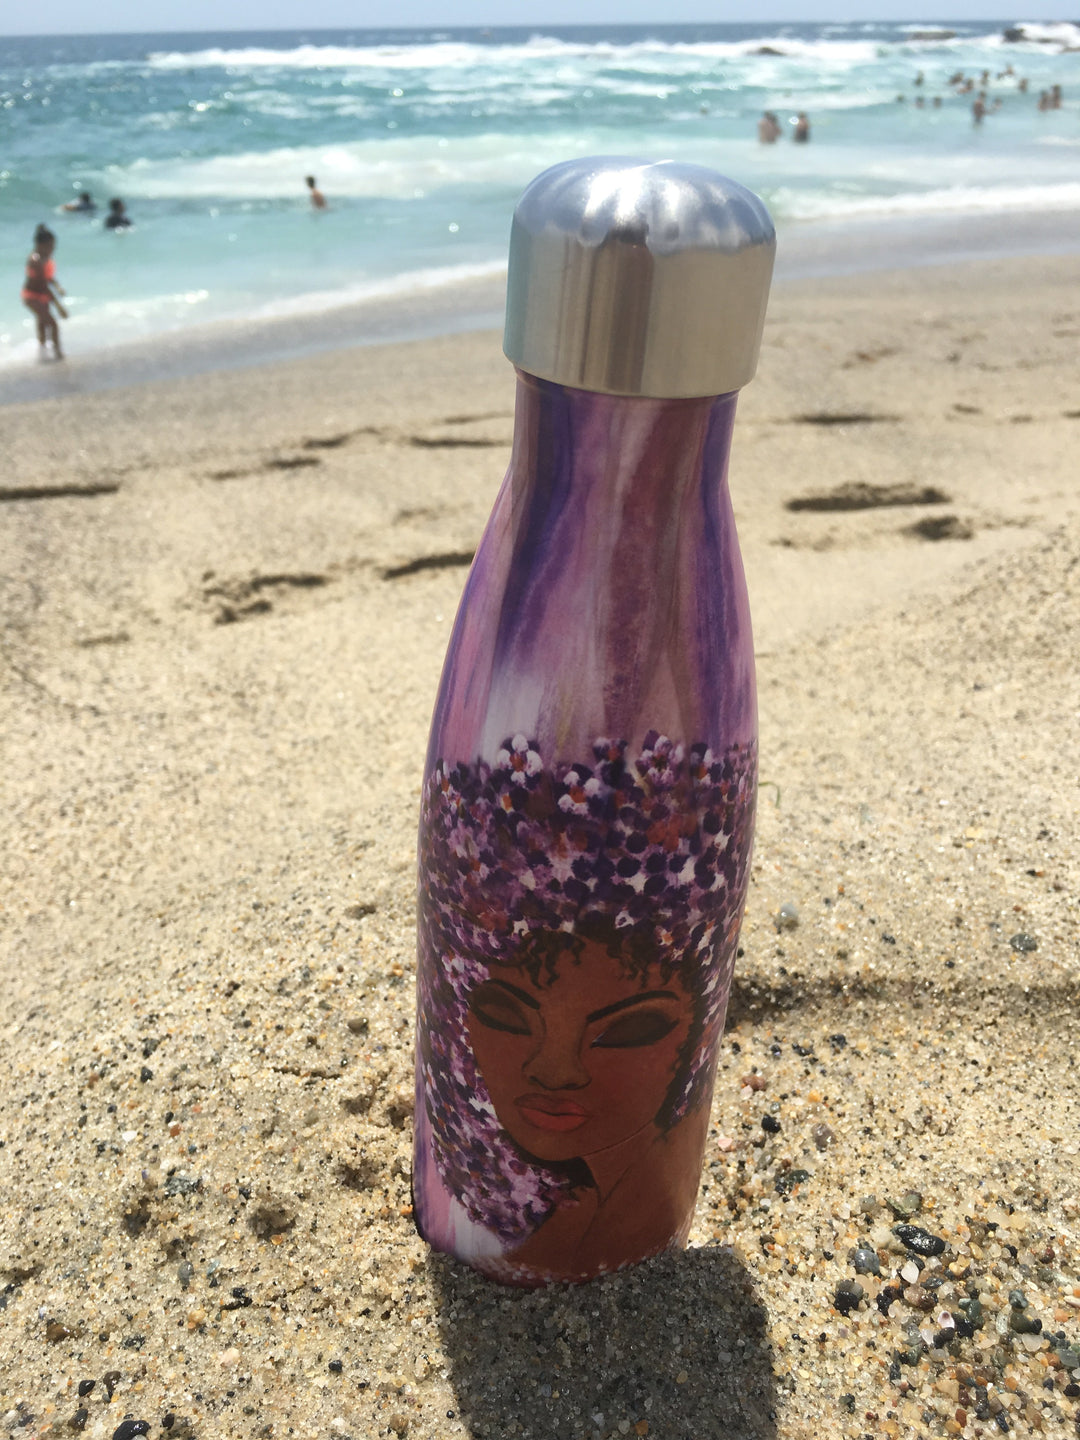 Love GOD: African American Stainless Steel Bottle by GBaby